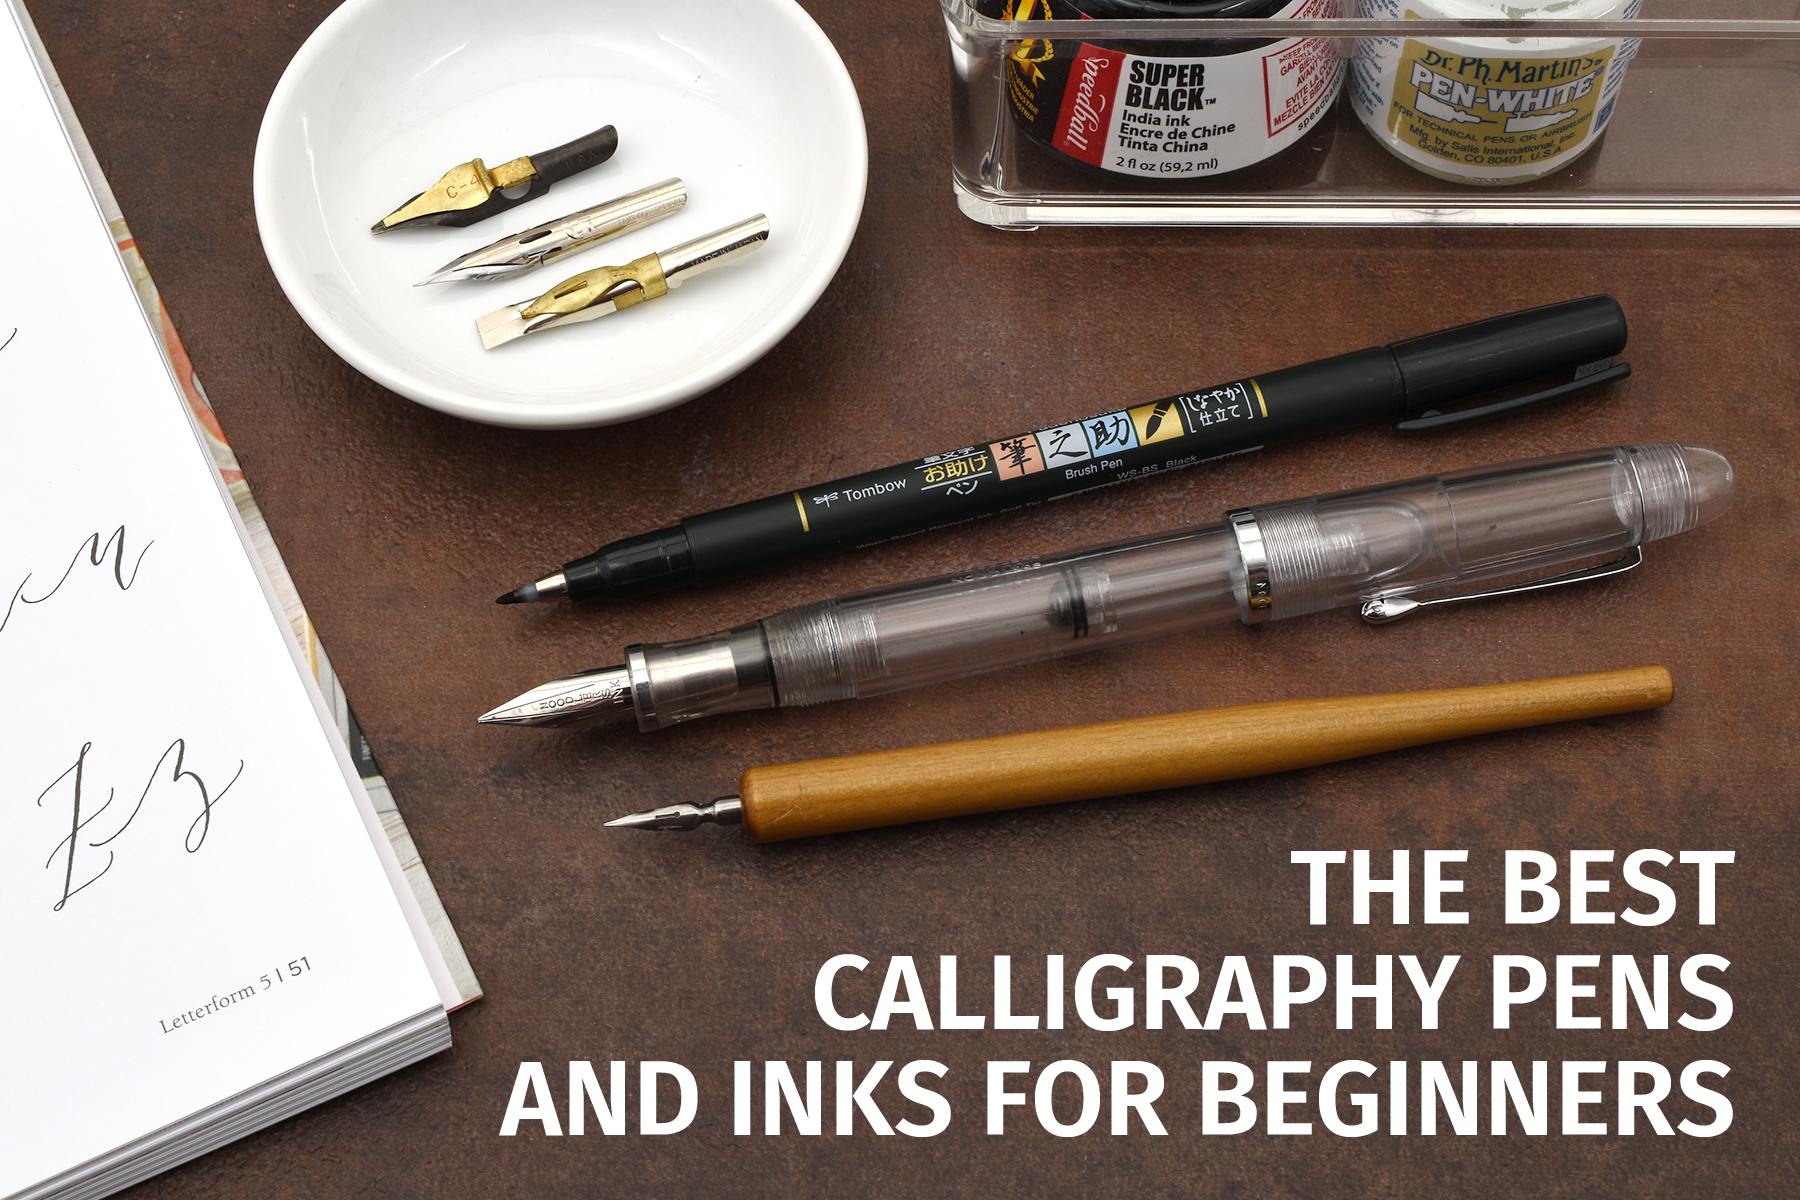 Calligraphy pens: The best brush pens to start with Calligraphy (in 2023)